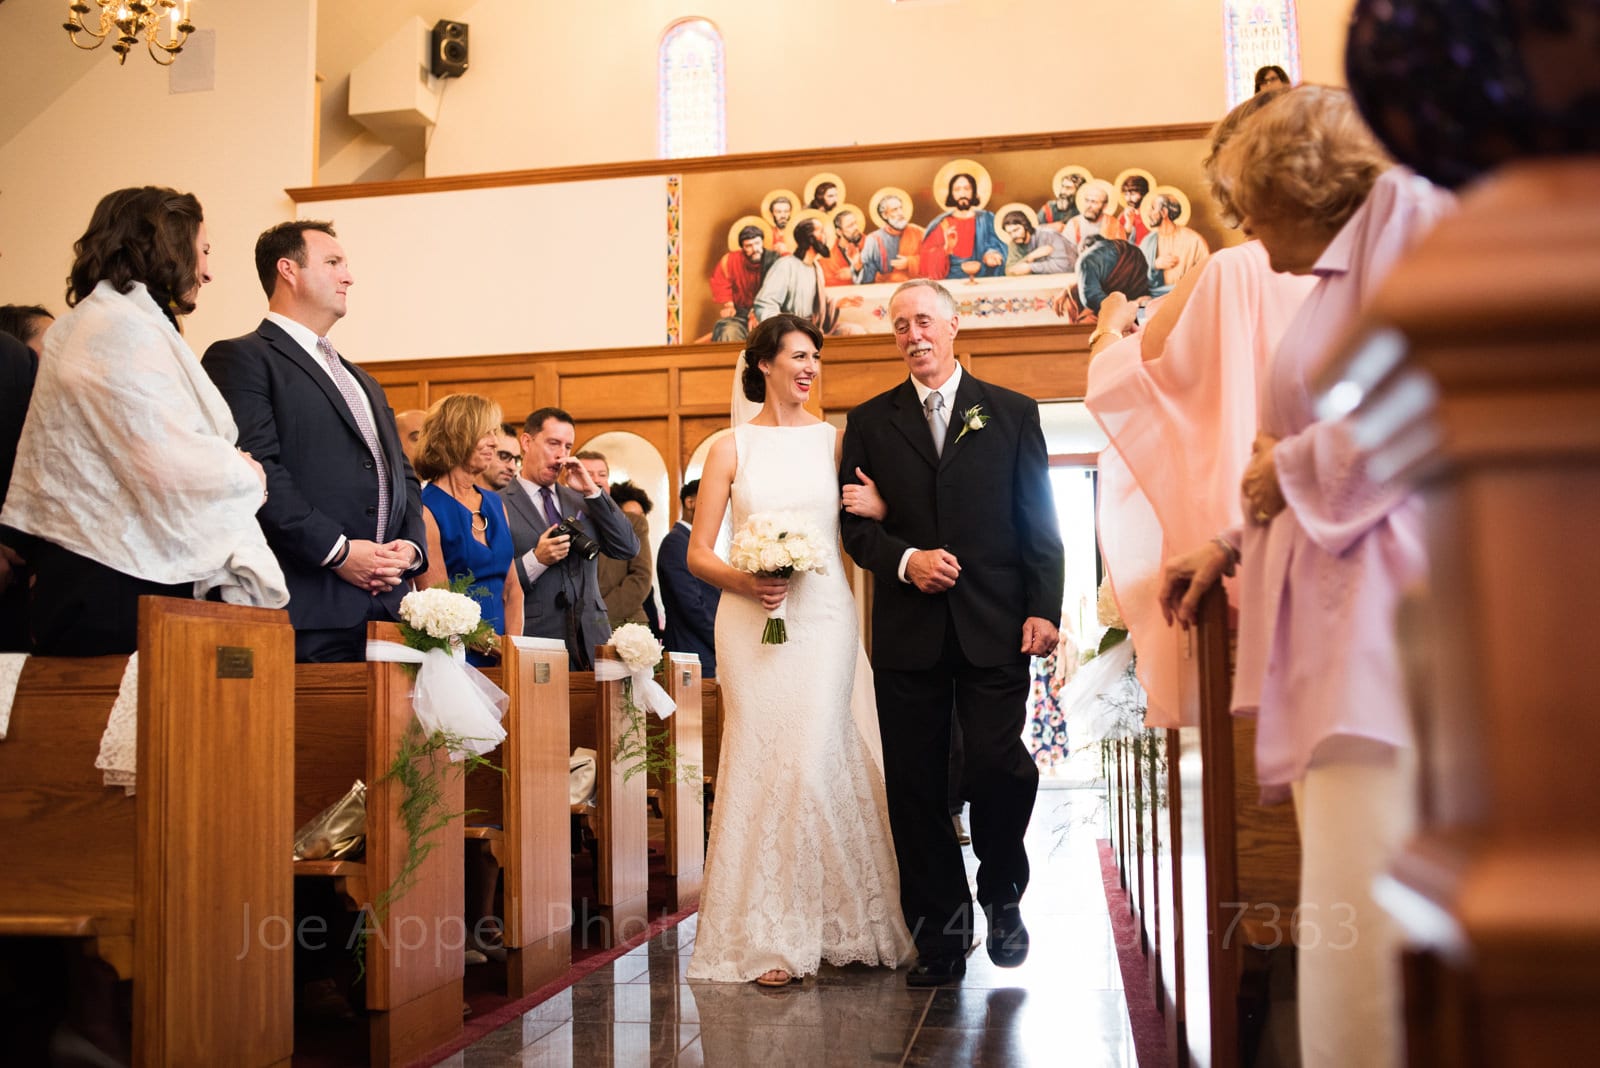 A bride smiles as she looks at her father while they walk down the aisle of St. Mary's Armenian Apostolic Church in Washington DC.